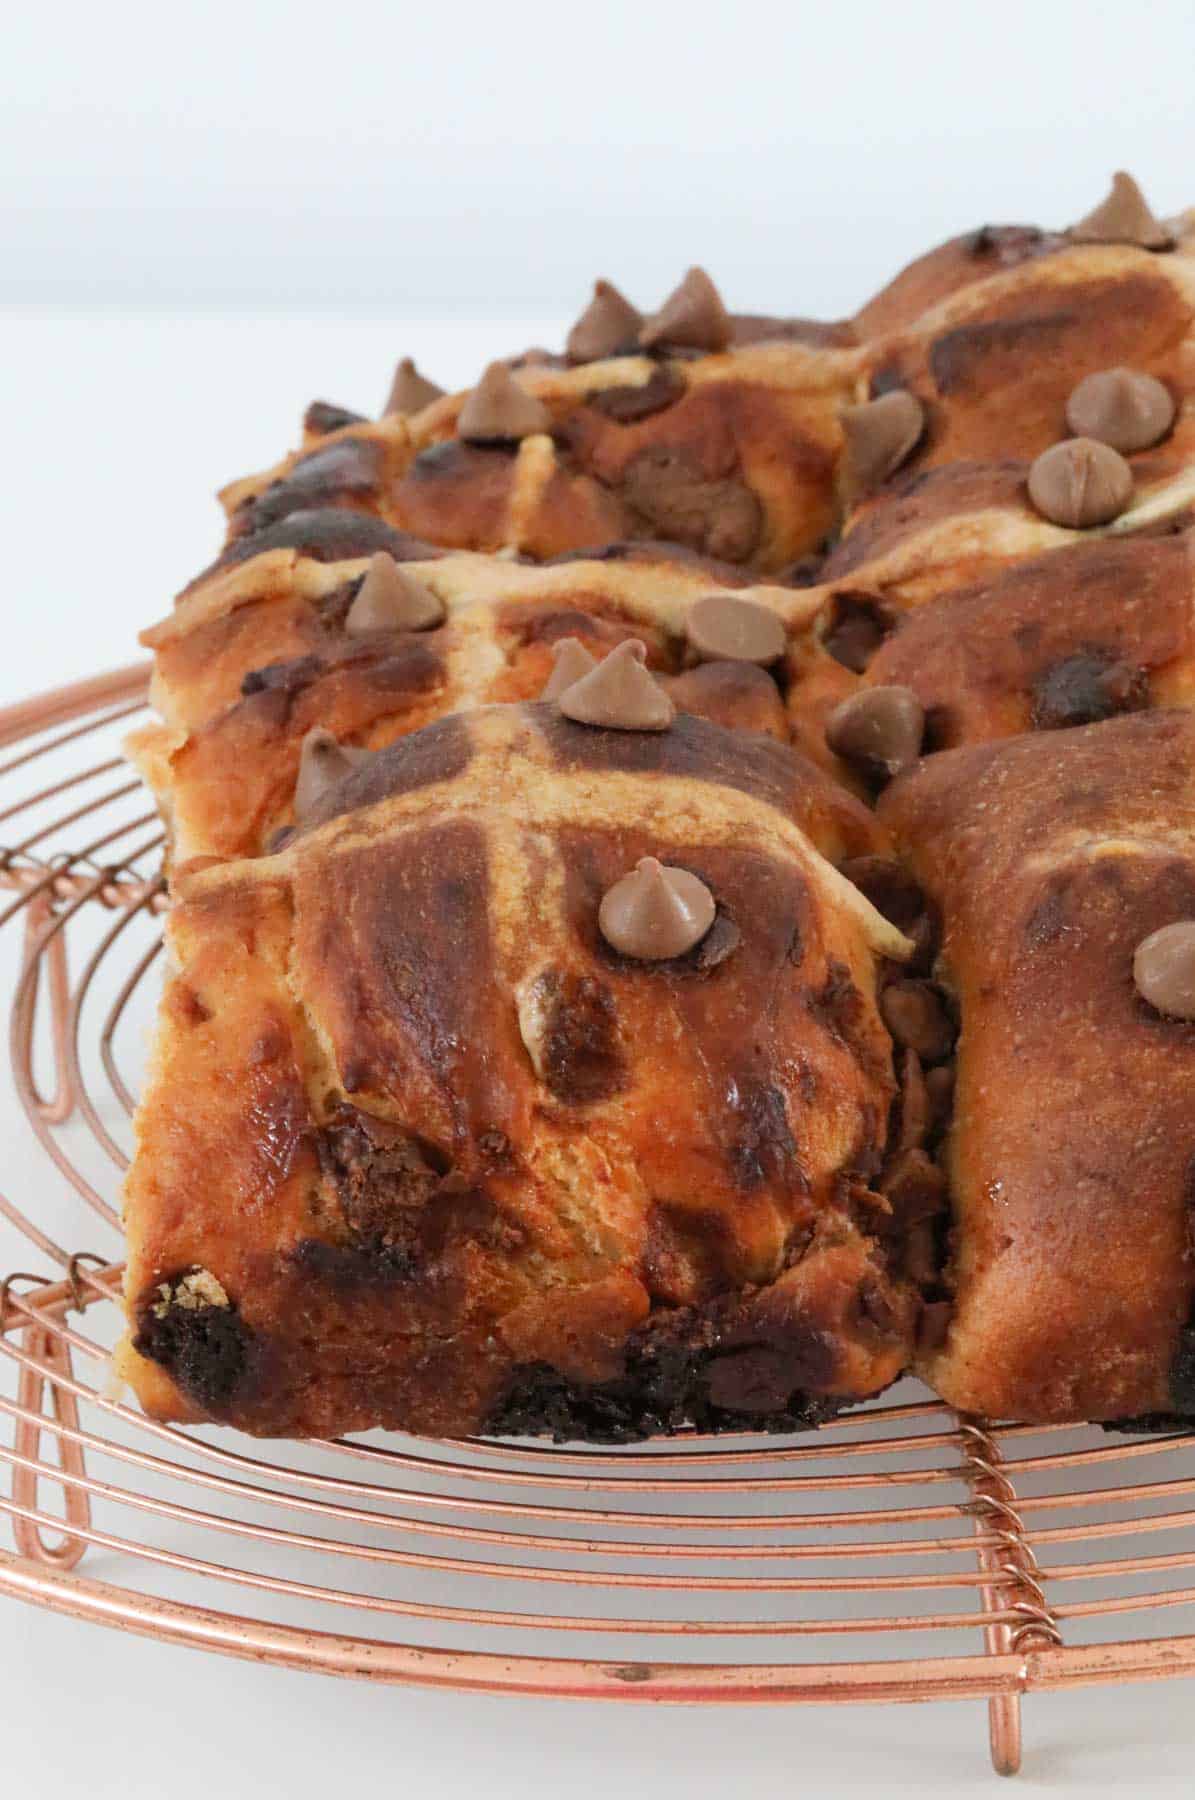 Hot cross buns with chocolate chips.